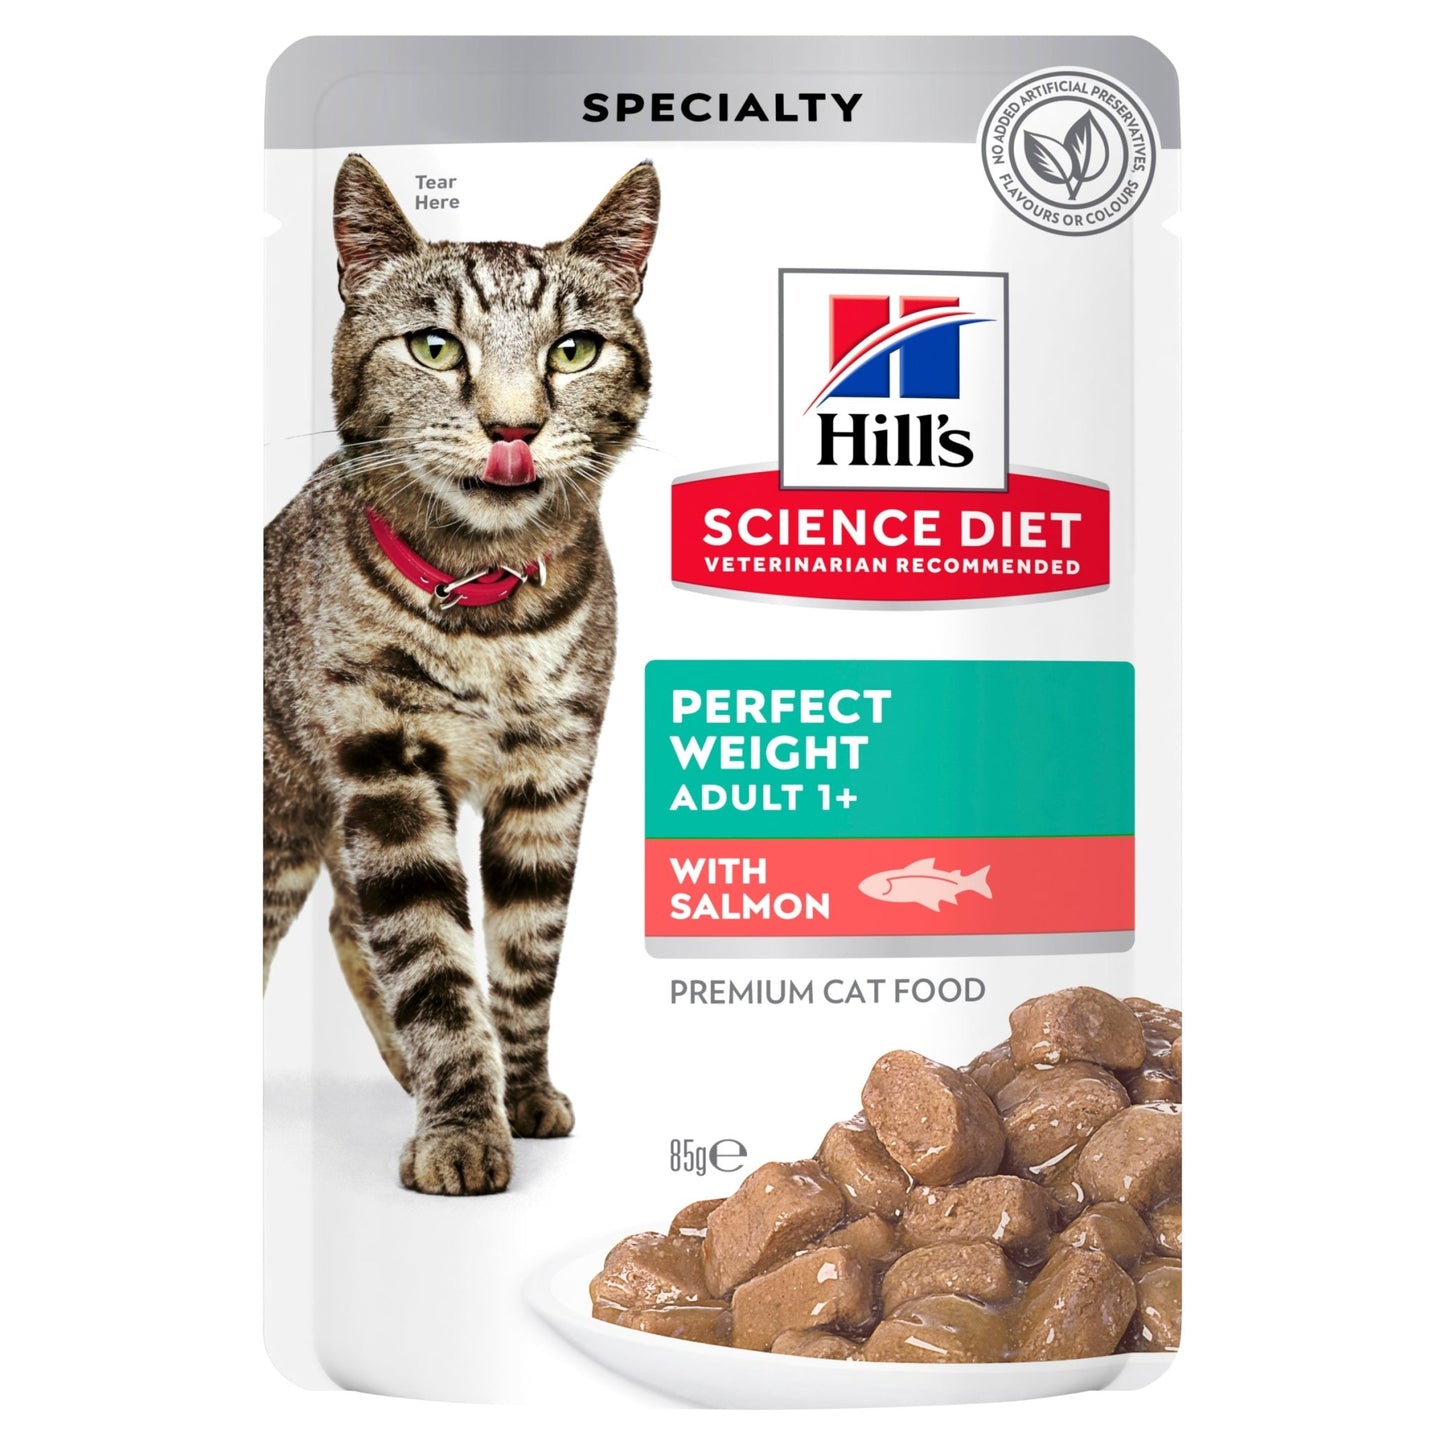 Hill's Science Diet Adult Perfect Weight Salmon Cat Food pouches 85g - Woonona Petfood & Produce